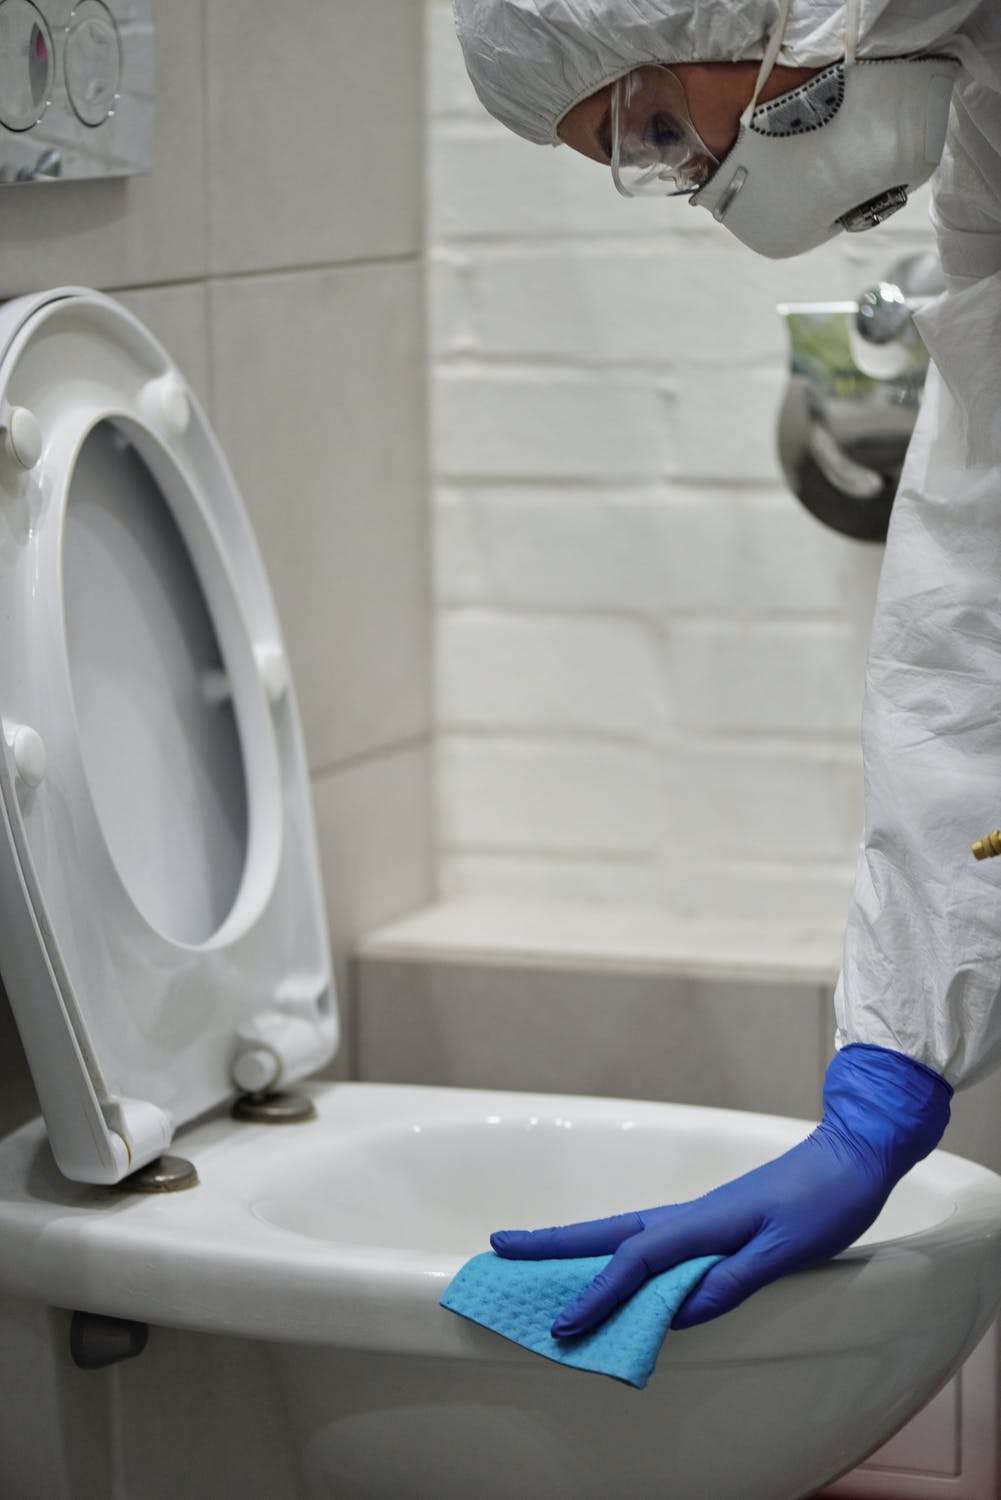 4 Culprits Behind Repetitive Clogging in Your Toilet